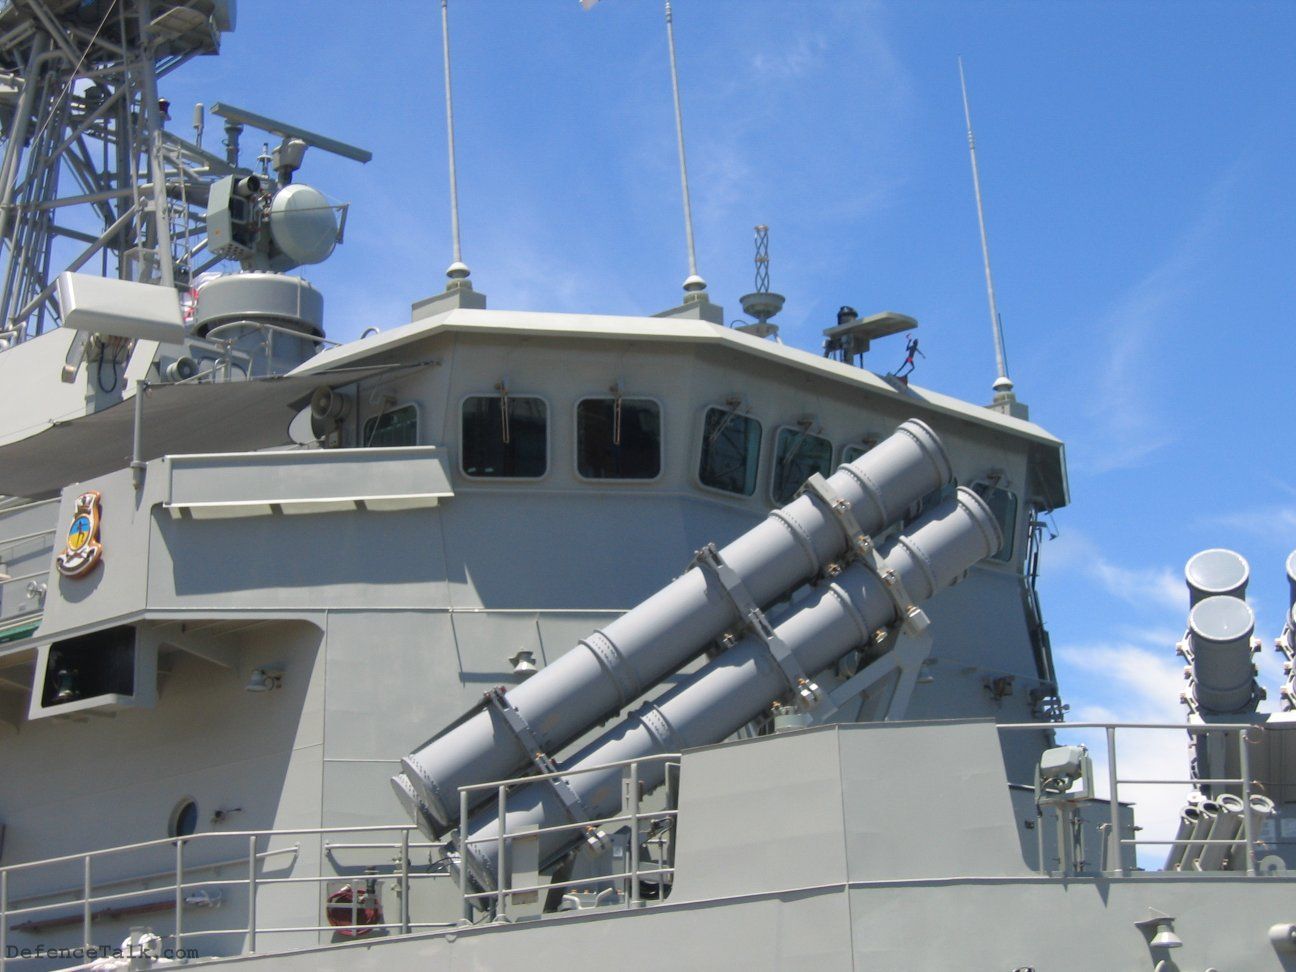 HMAS Warramunga fitted out with Mk 141 cannister launchers for the recently